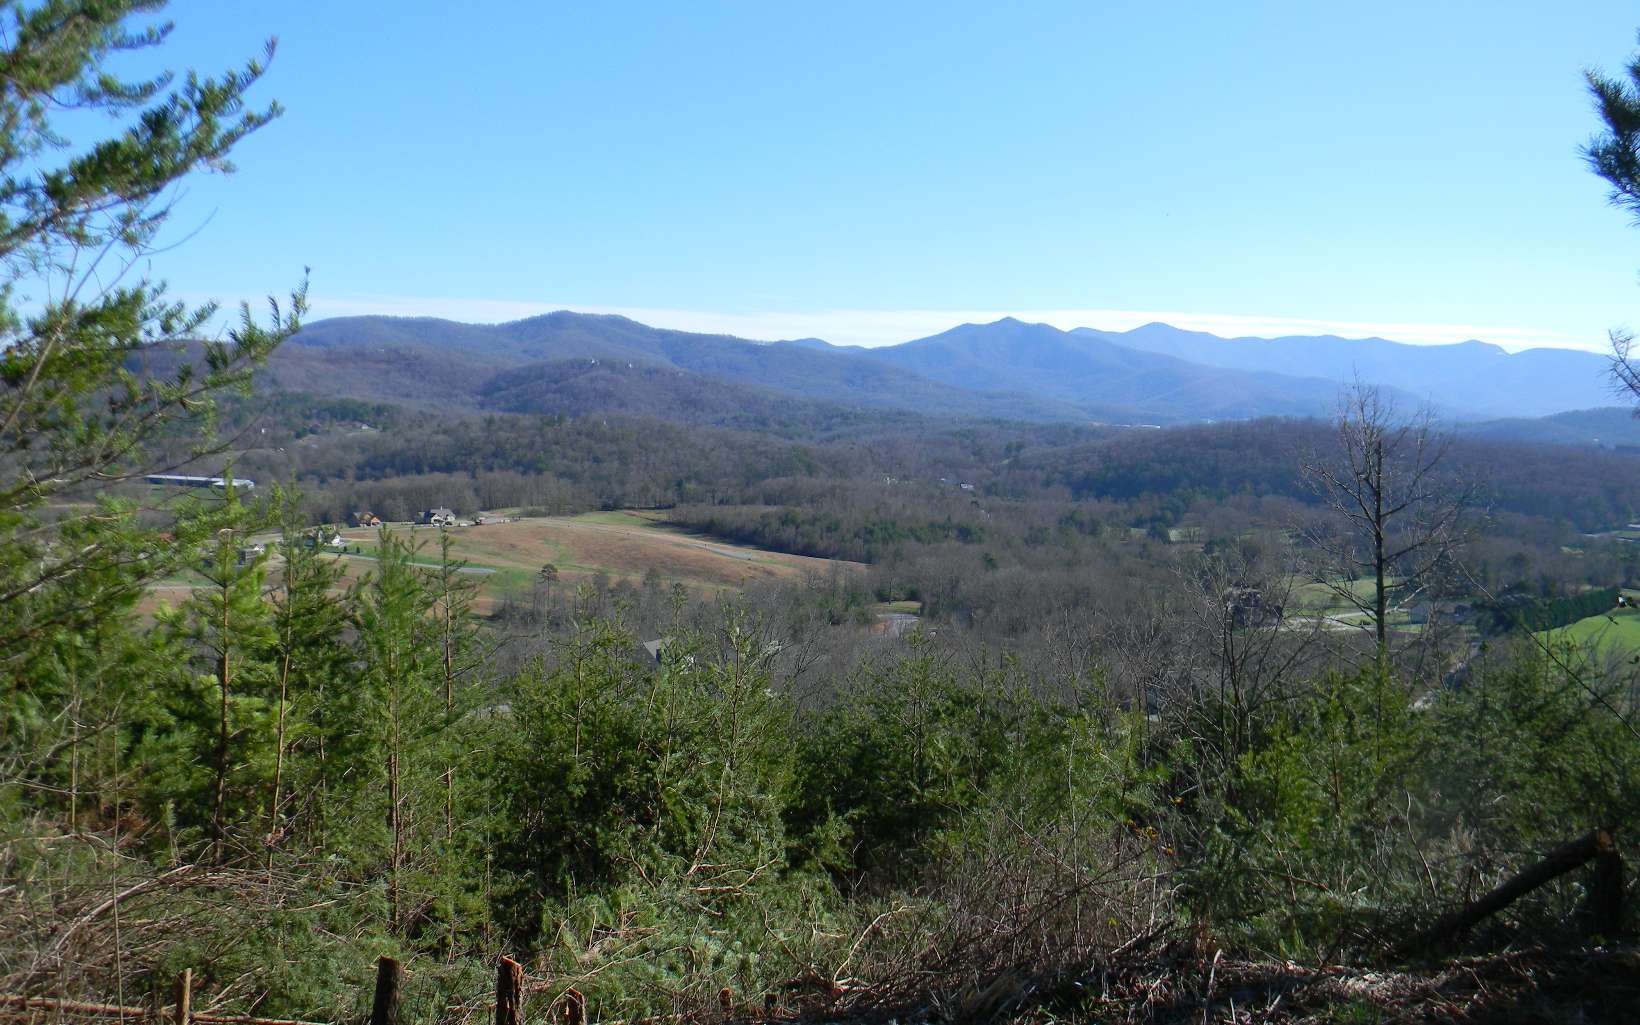 THE VIEW IS UNBEATABLE!! This lot offers panoramic mountain and valley views, paved roads, PLUS close to Lake Chatuge, Brasstown Valley Resort and golf. PERFECT PLACE FOR YOUR PRIVATE MOUNTAIN HOME!!